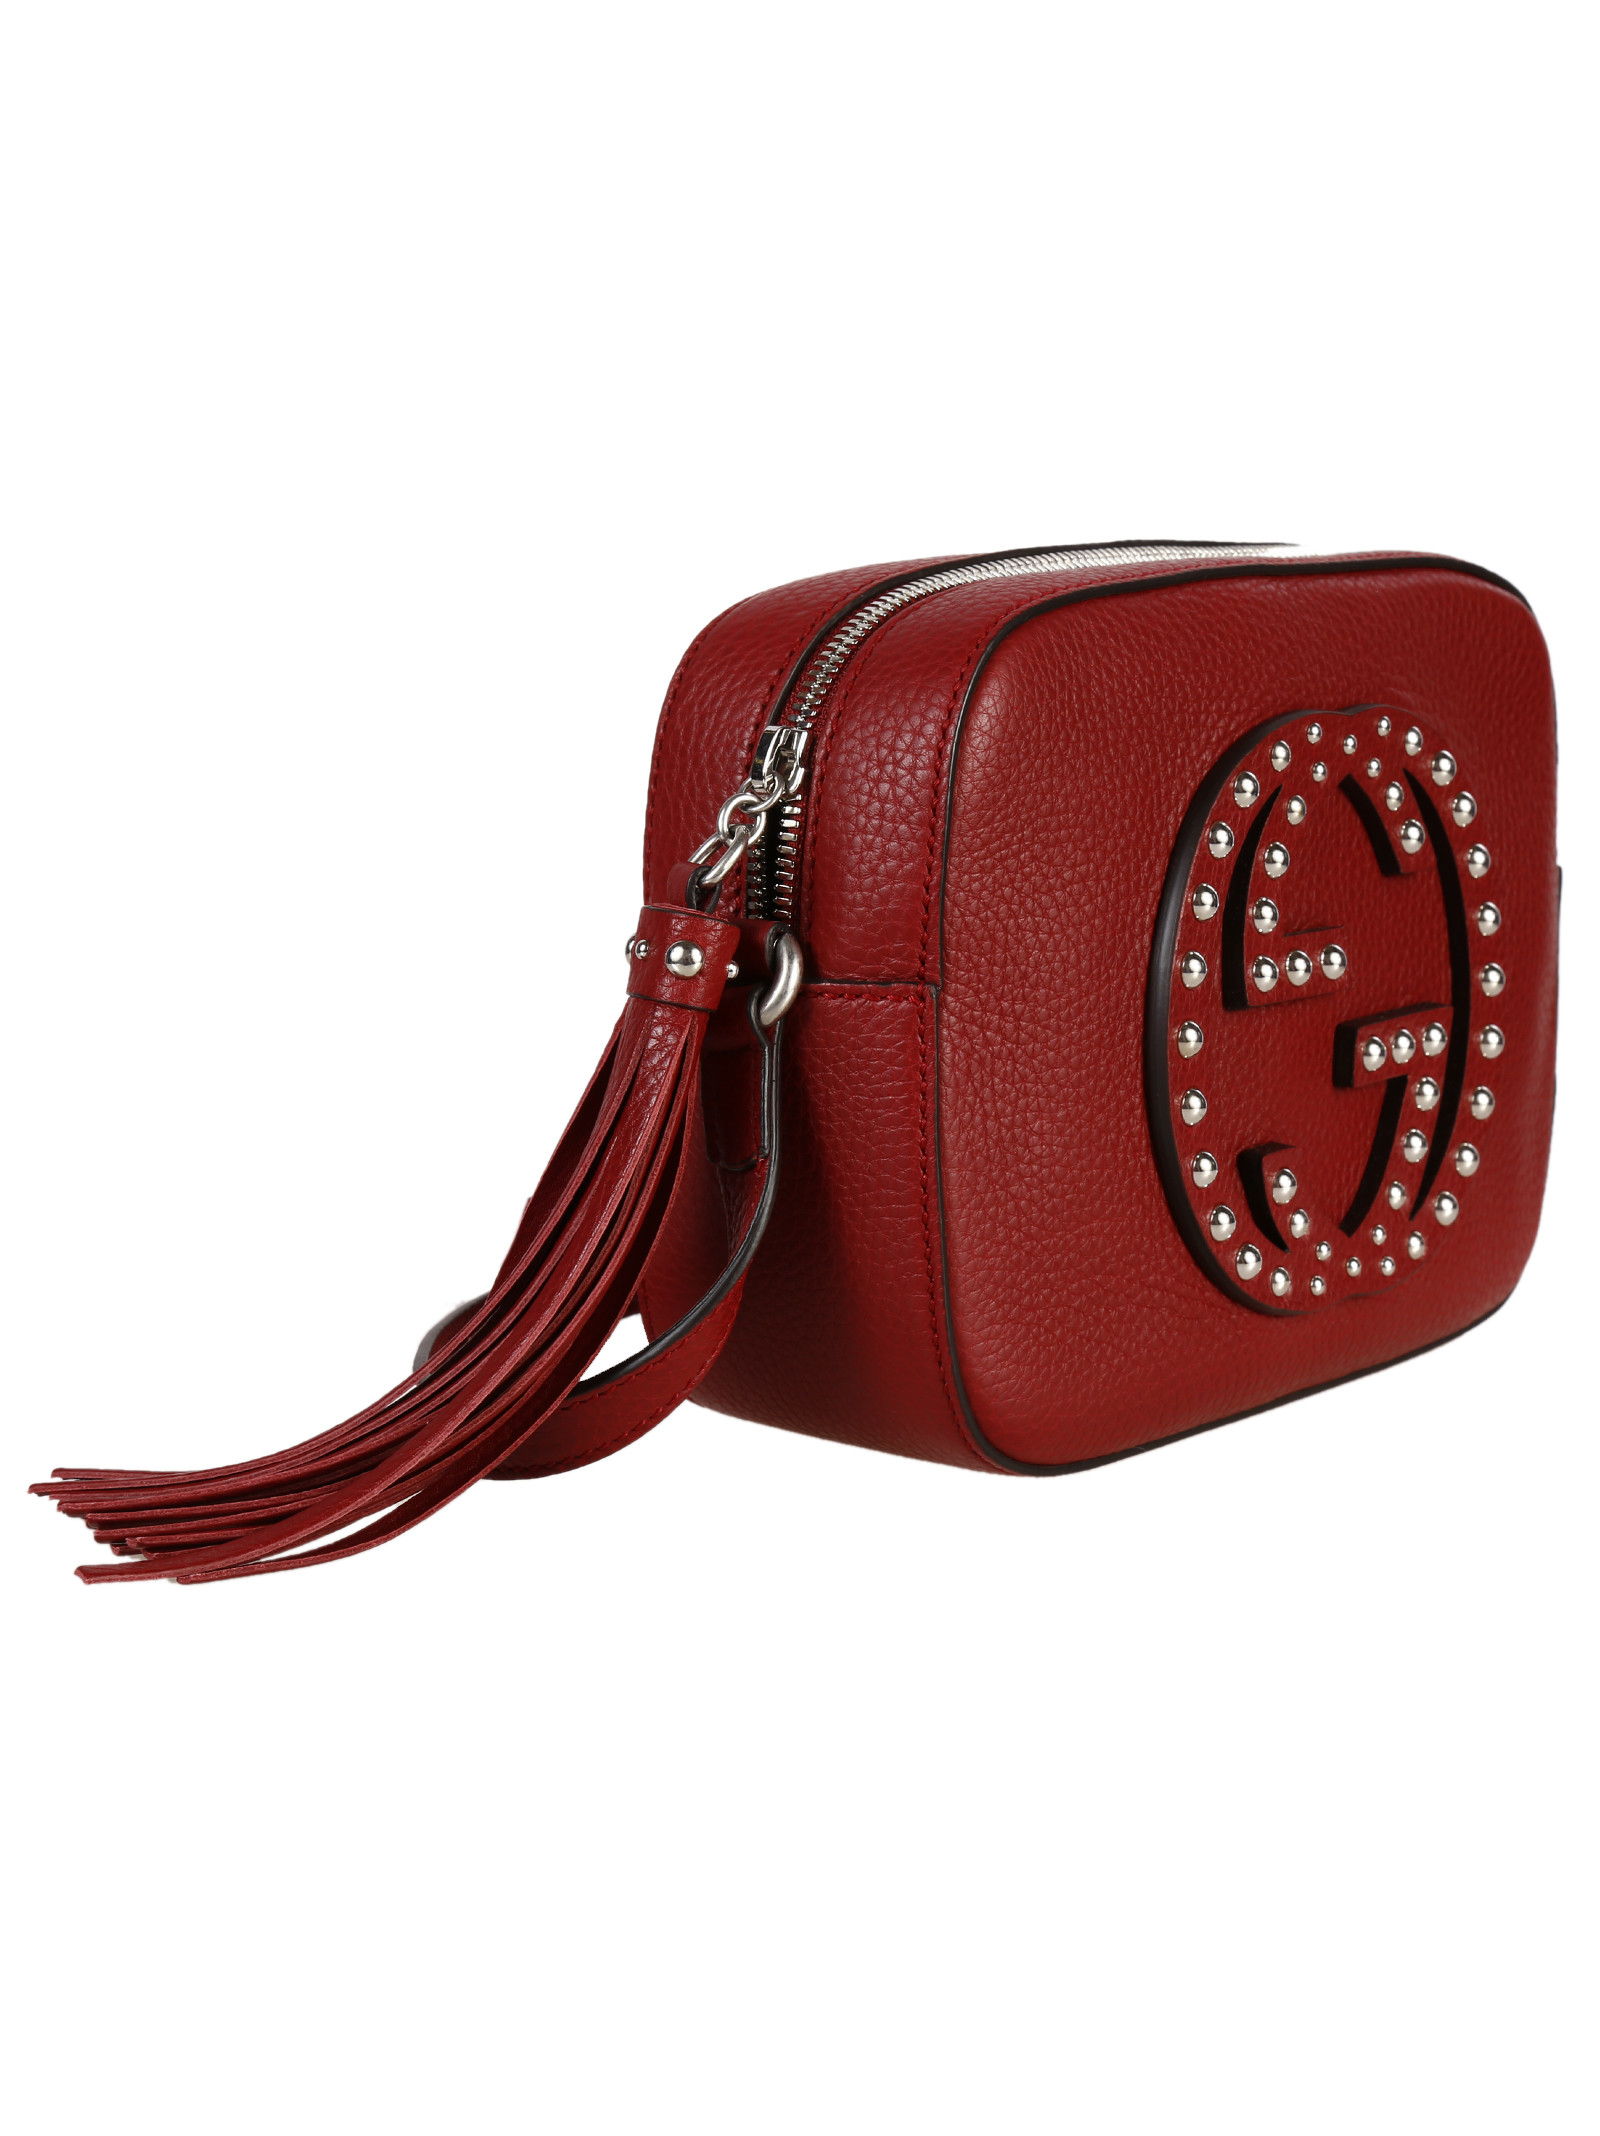 Gucci Soho Studded Leather Disco Bag in Red (Bordeaux) | Lyst